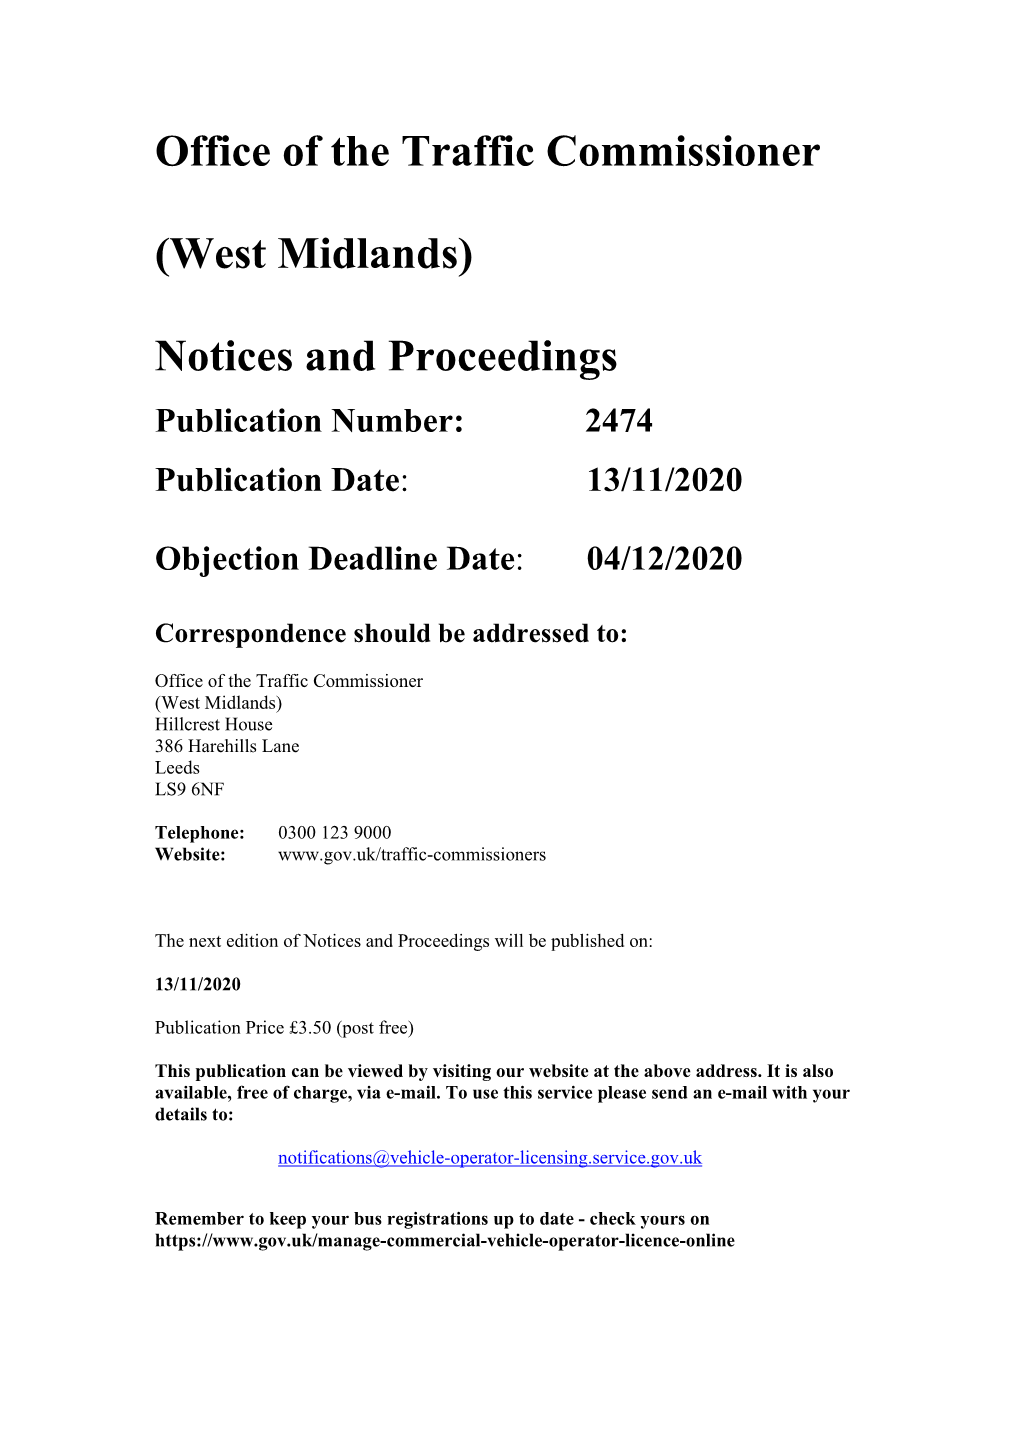 Notices and Proceedings for the West Midlands 2474